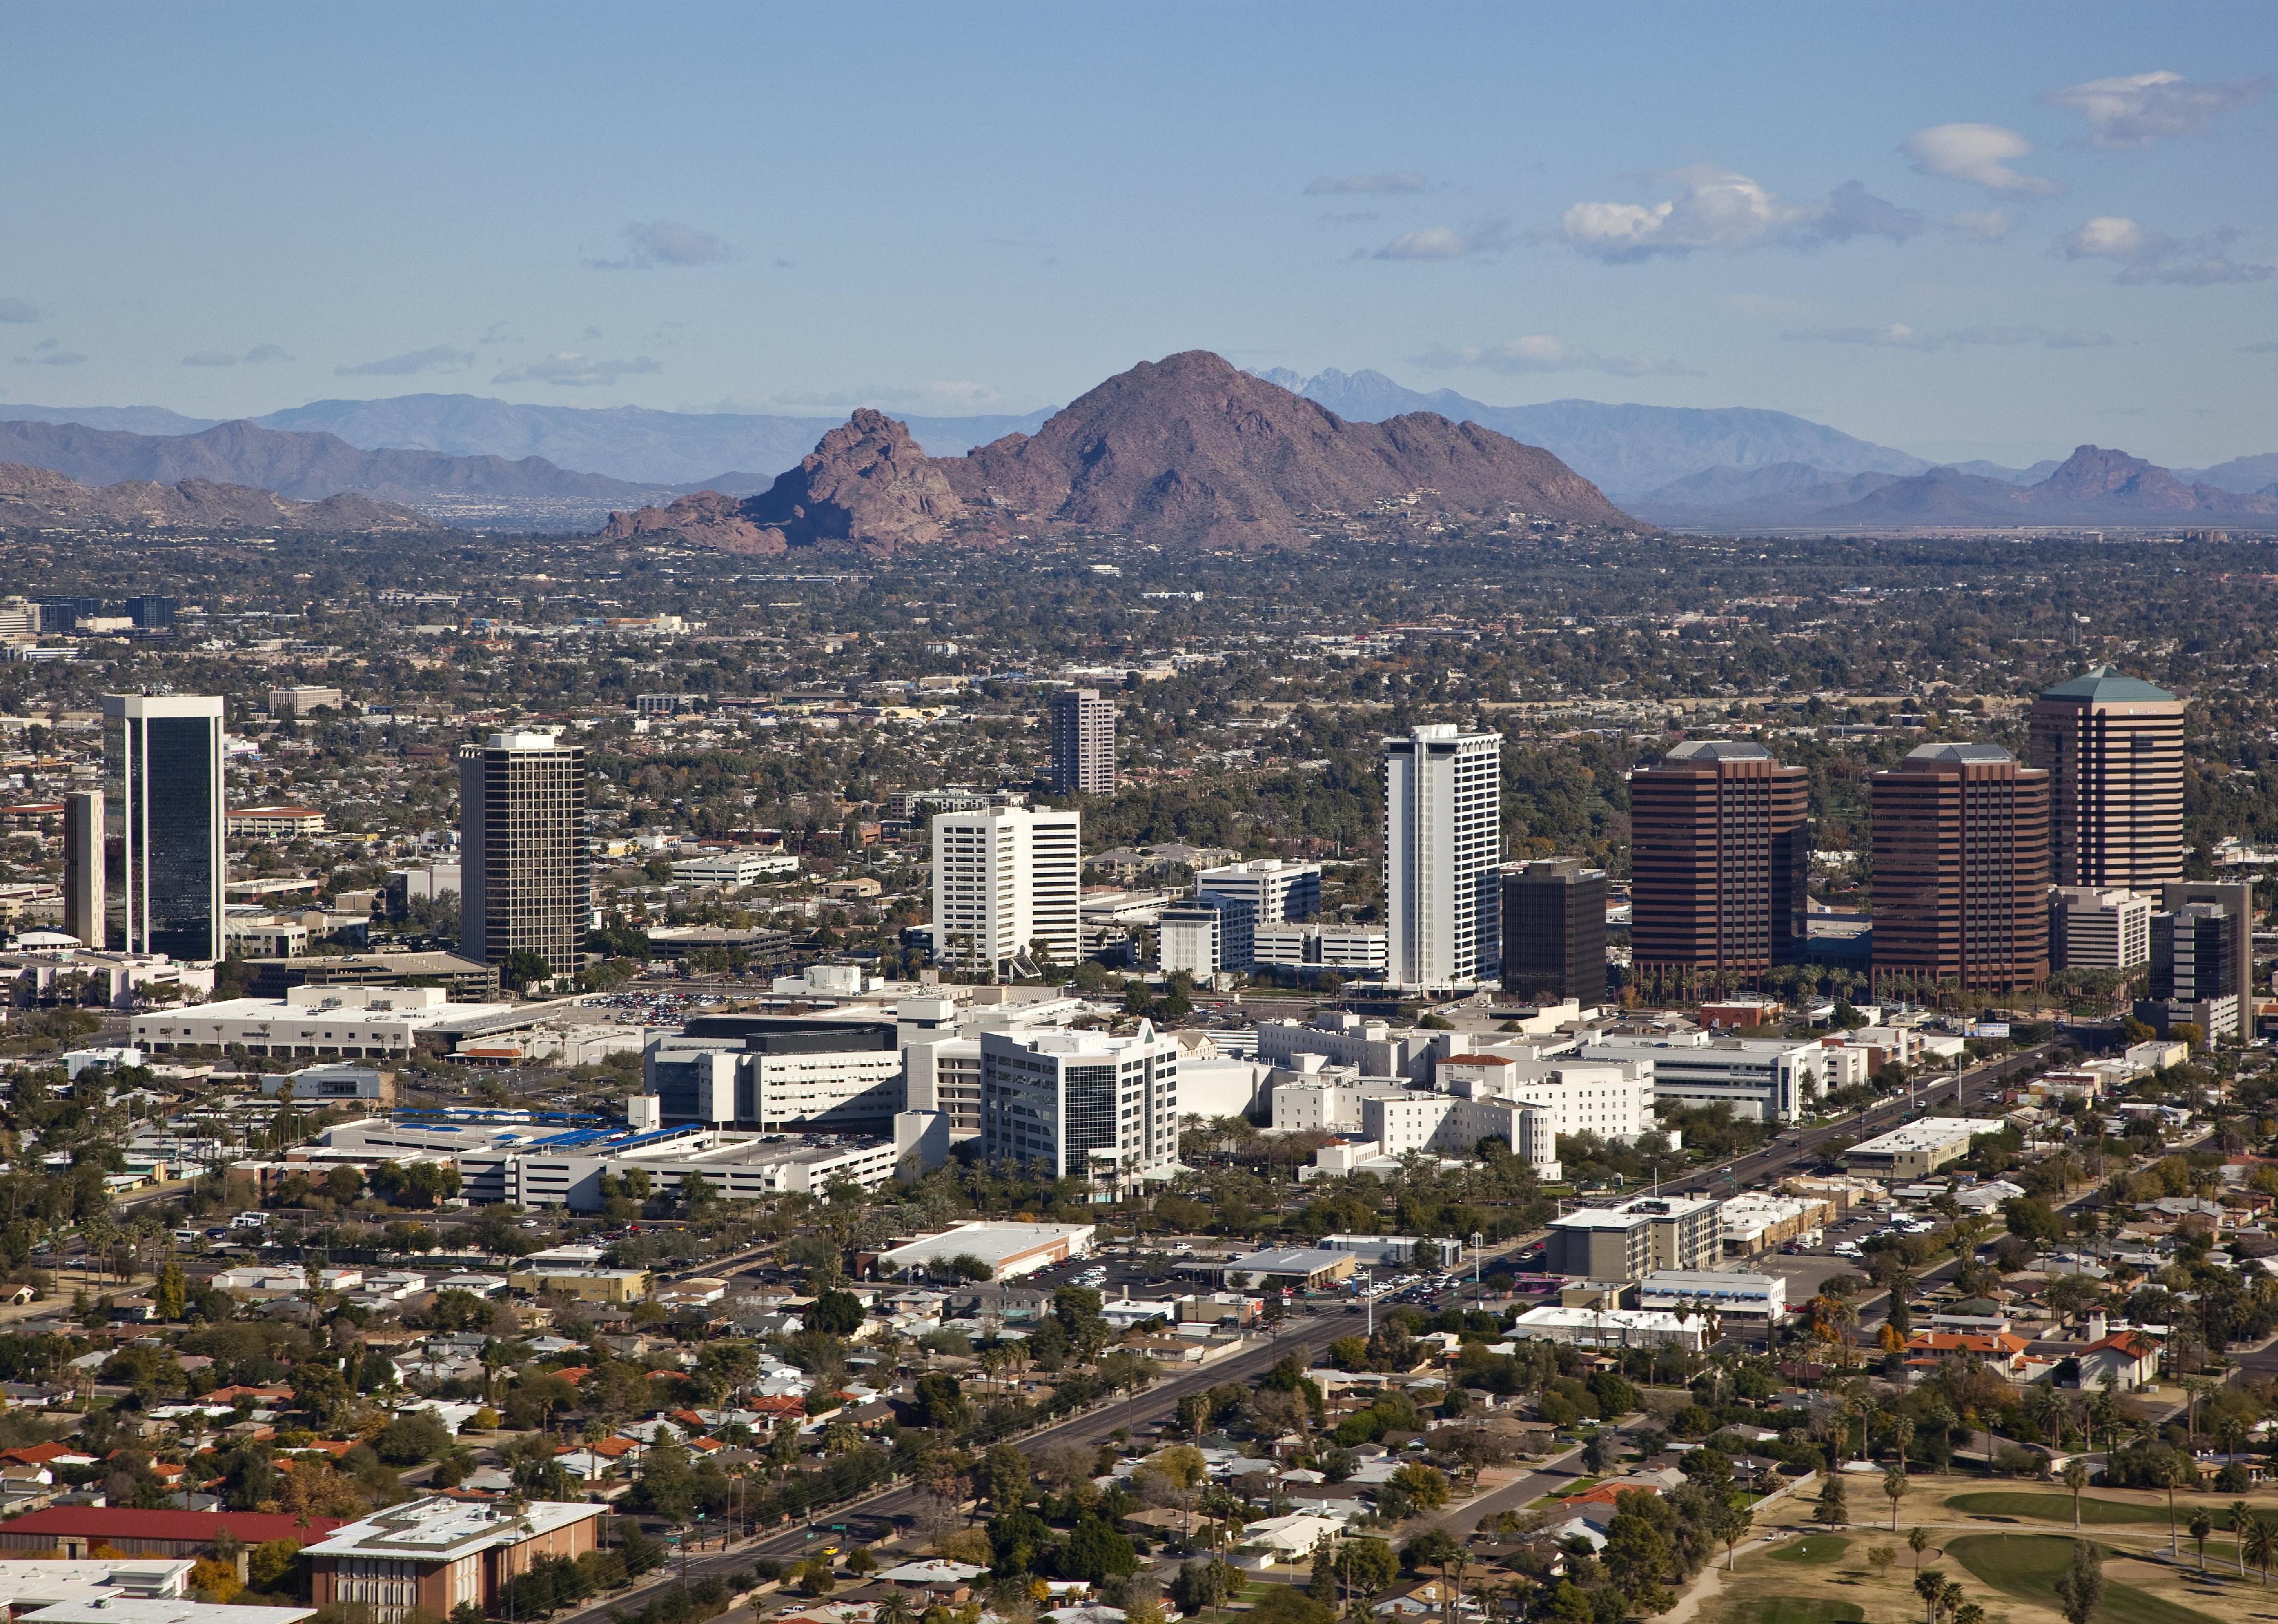 A photo of the Phoenix skyline, an area with high investment